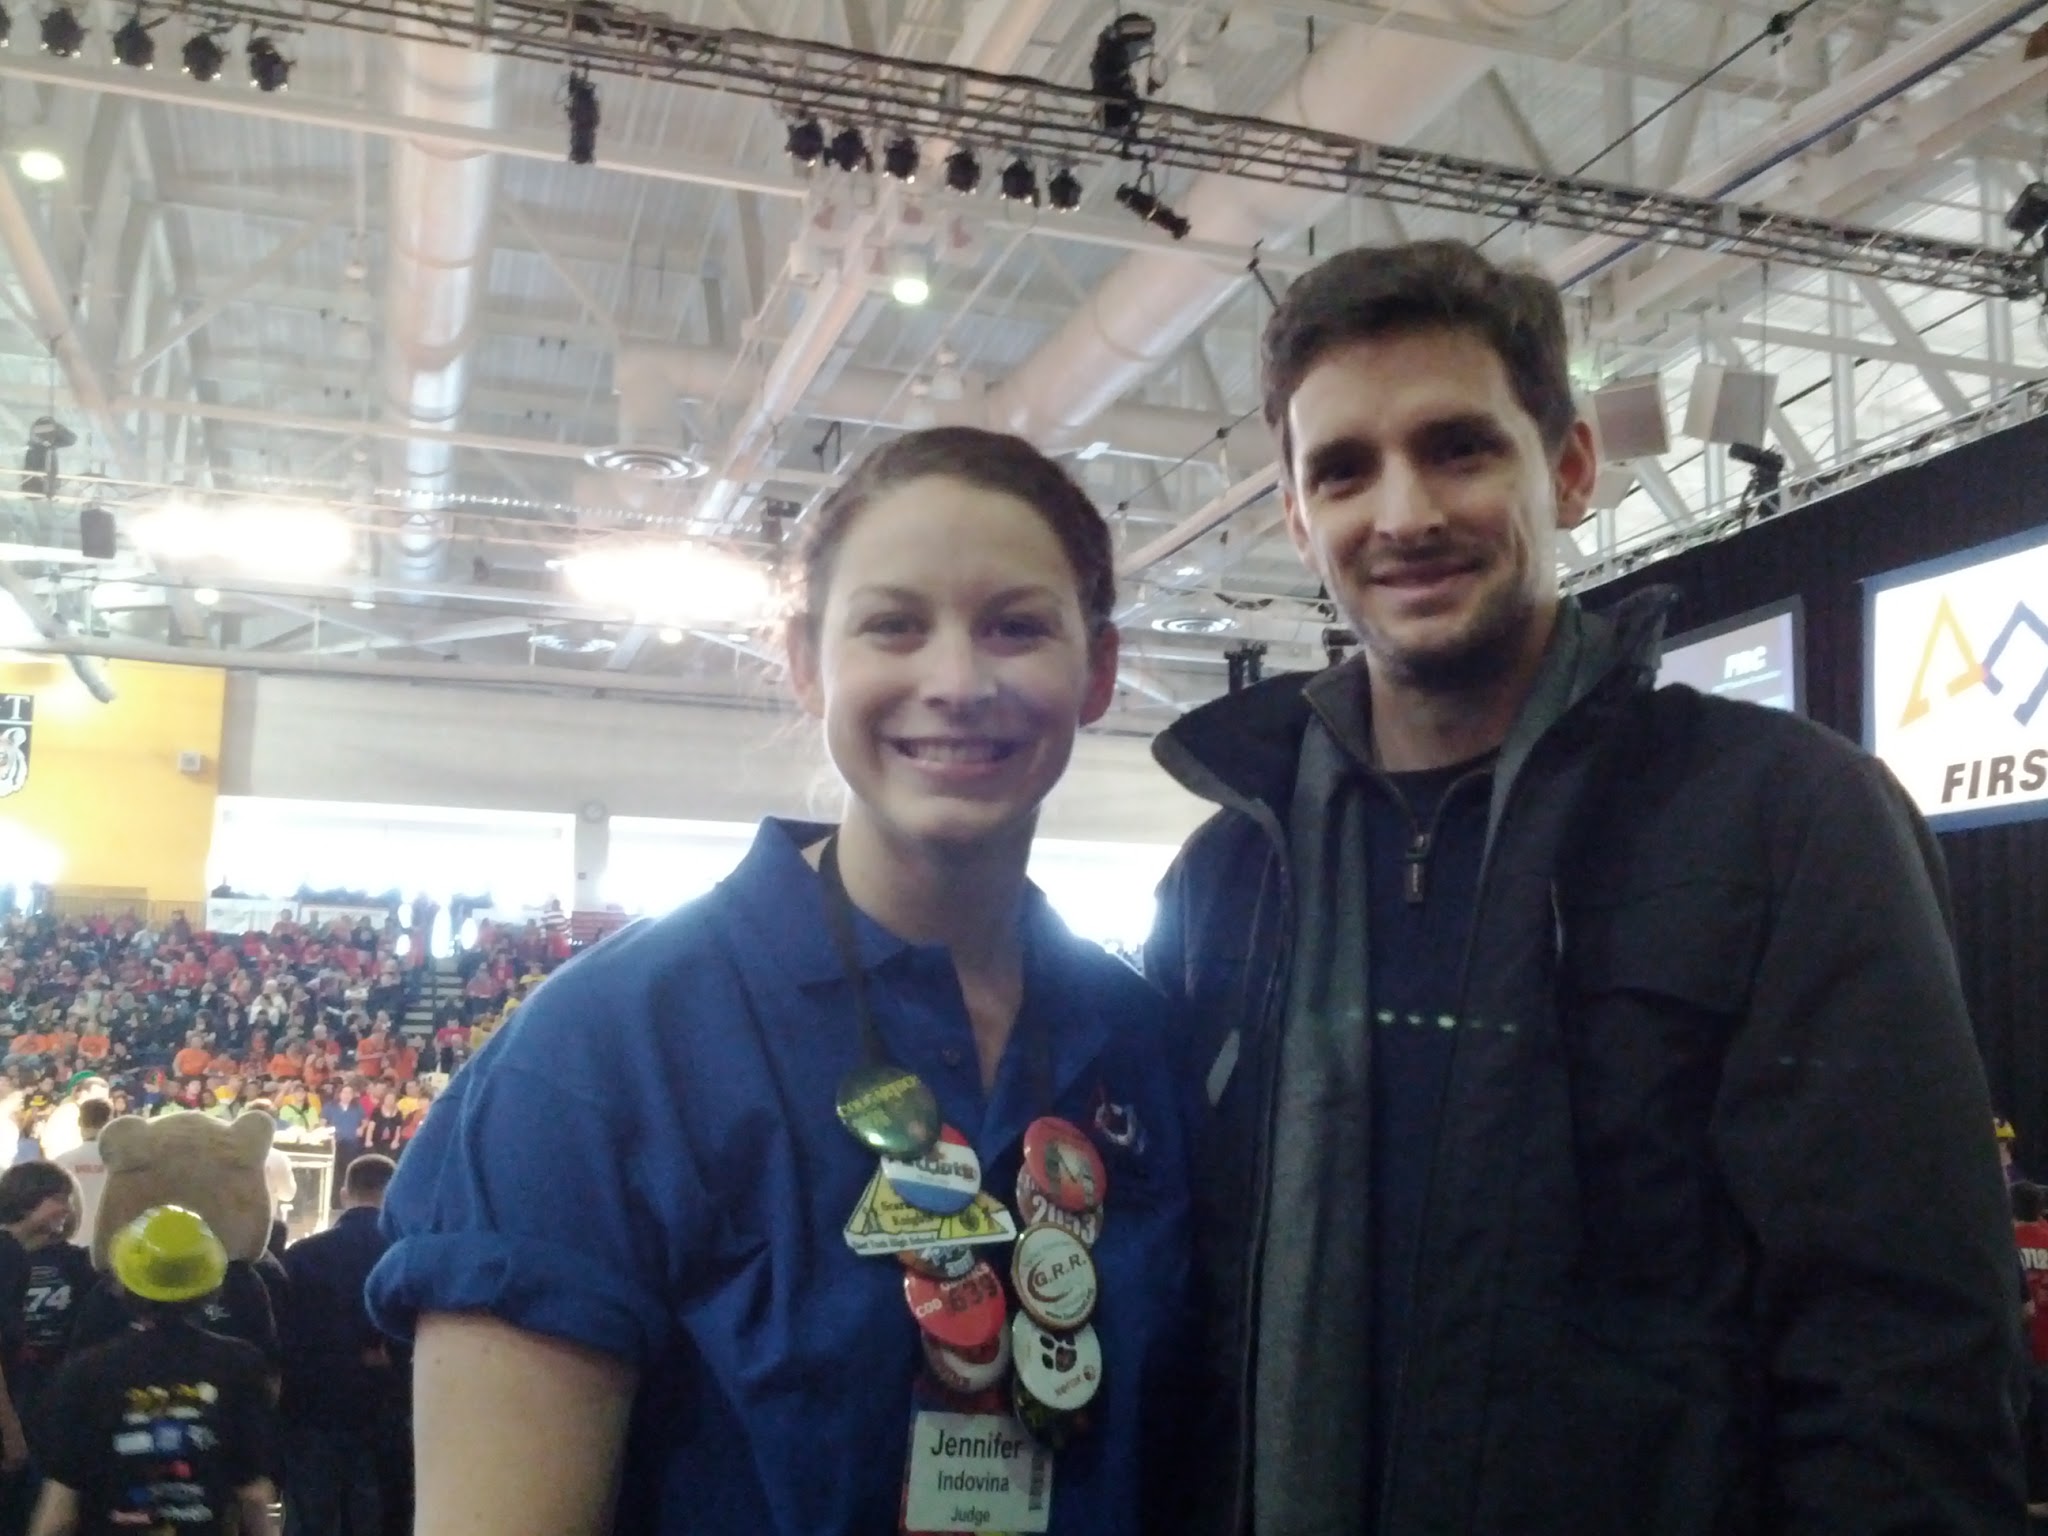 Tenrehte CEO Jennifer Indovina & Senior Engineer Carlos Barrios @ Rebound Rumble, the 2012 FIRST Robotics Competition at RIT